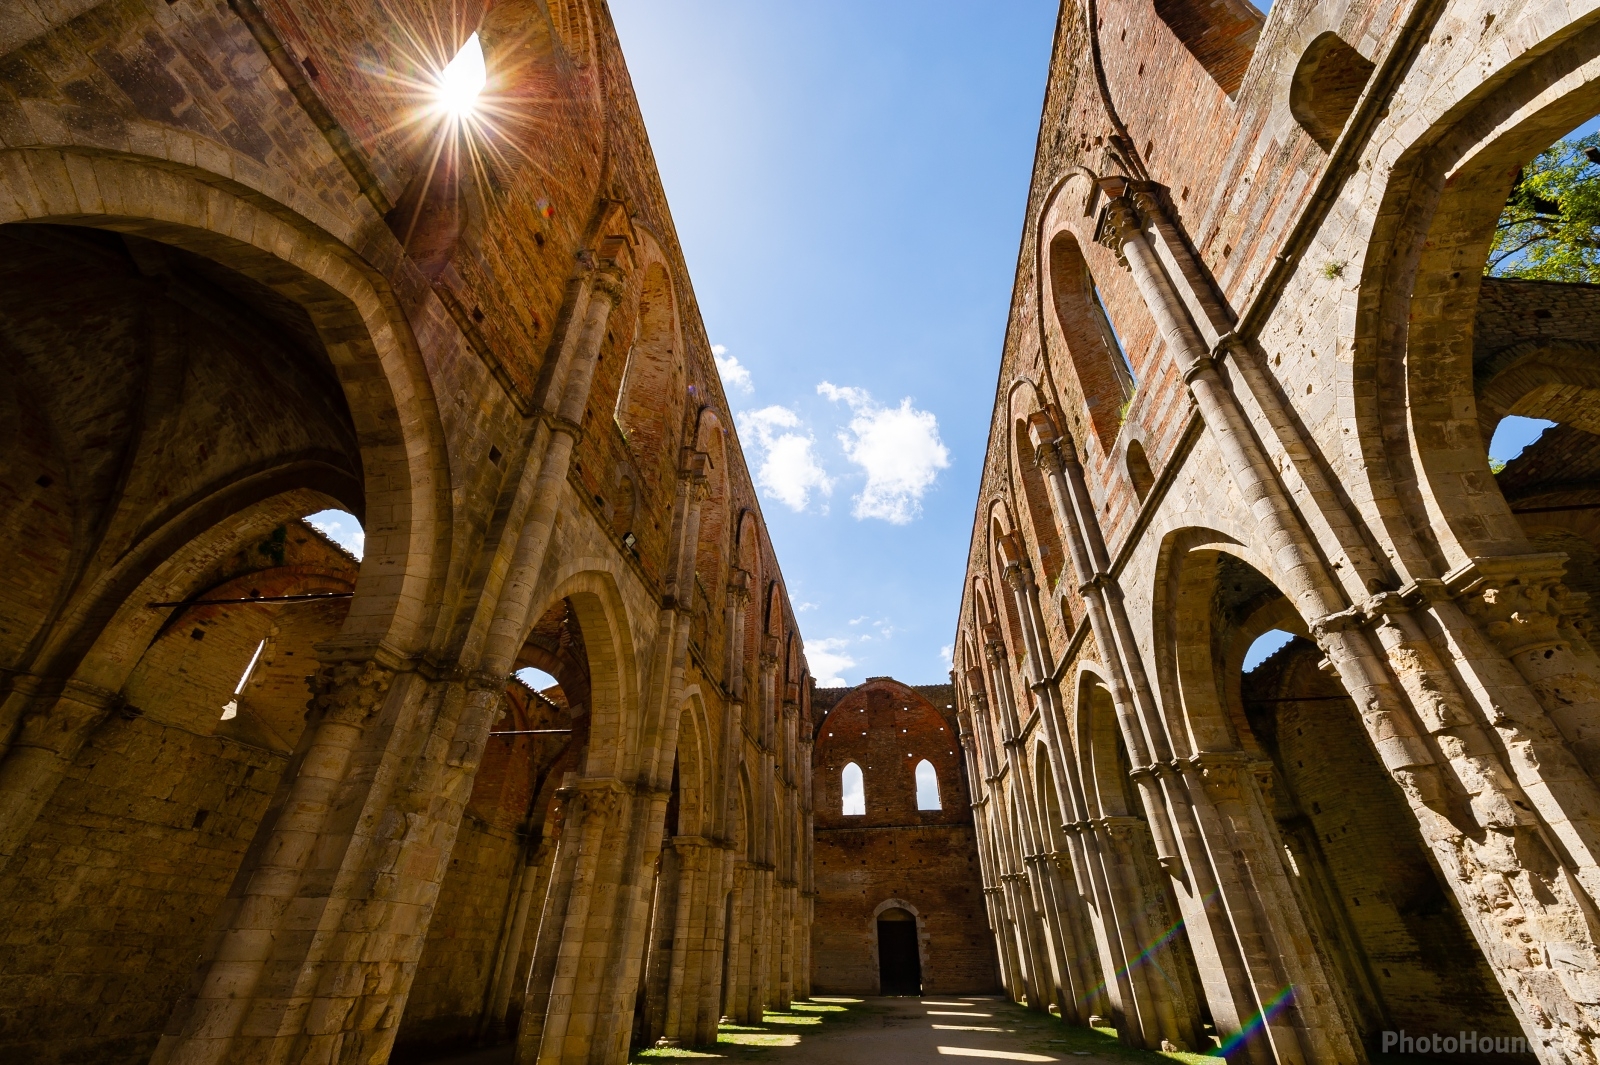 Image of Abbey of San Galgano - interior by VOJTa Herout